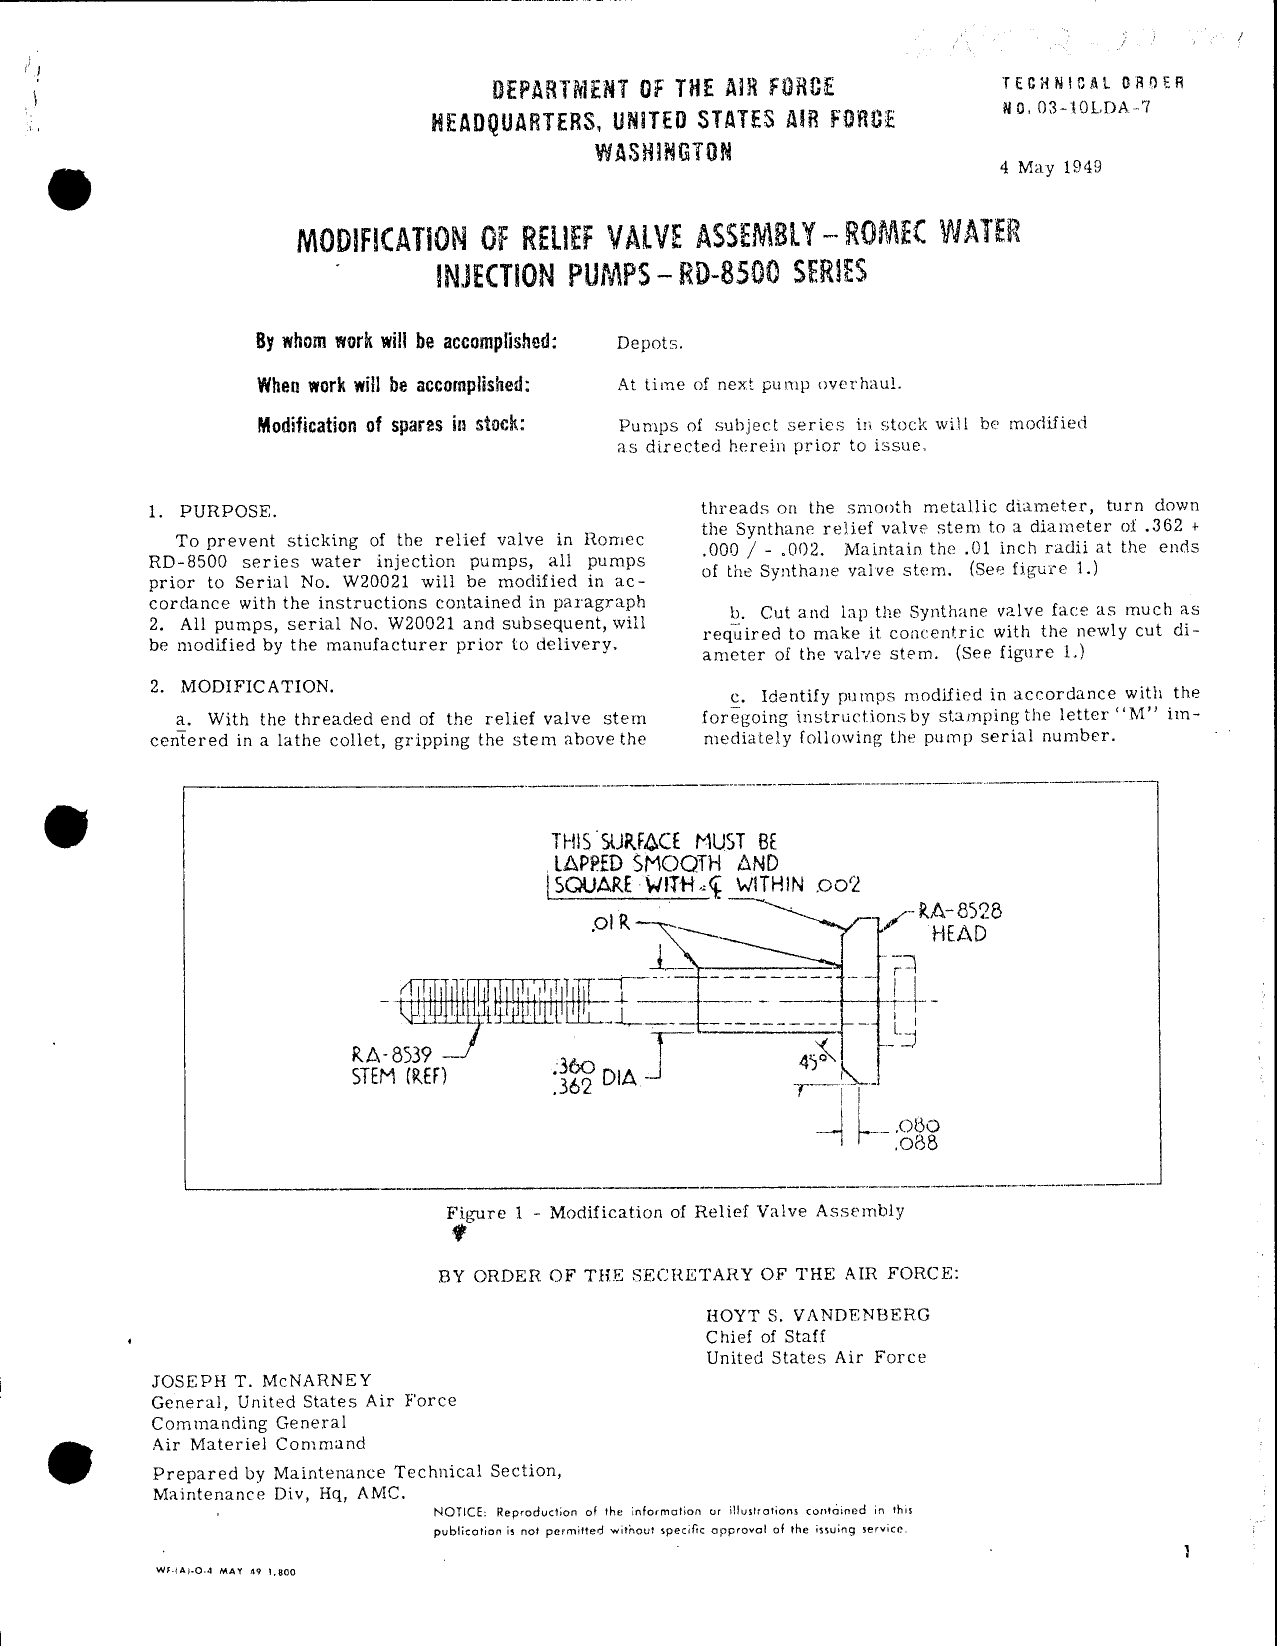 Sample page 1 from AirCorps Library document: Modification of Relief Valve Assem for Romec Water Injection Pumps RD-8500